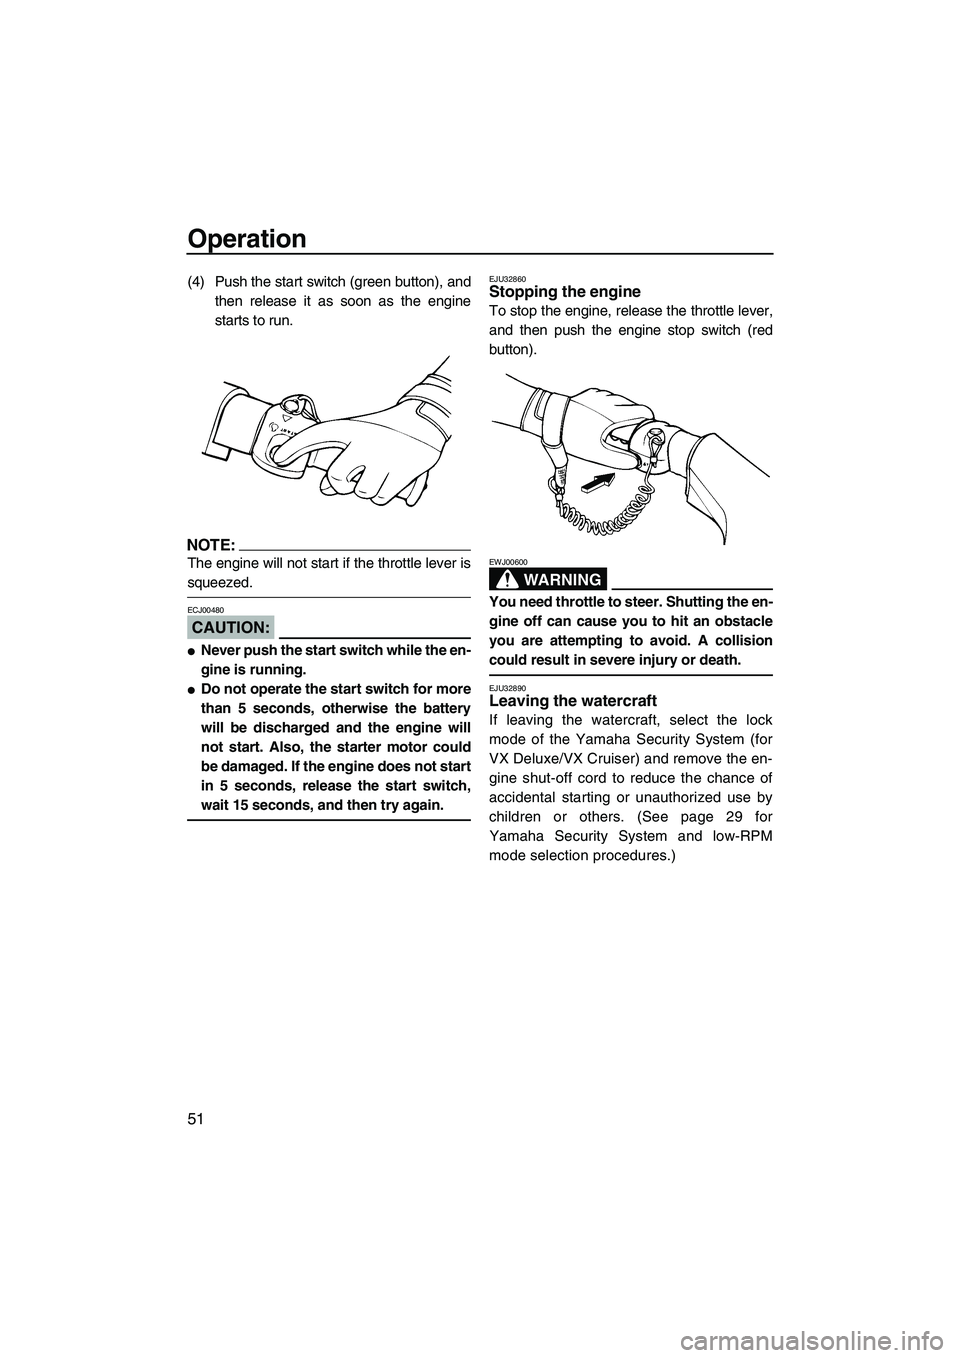 YAMAHA VX 2008  Owners Manual Operation
51
(4) Push the start switch (green button), and
then release it as soon as the engine
starts to run.
NOTE:
The engine will not start if the throttle lever is
squeezed.
CAUTION:
ECJ00480
Ne